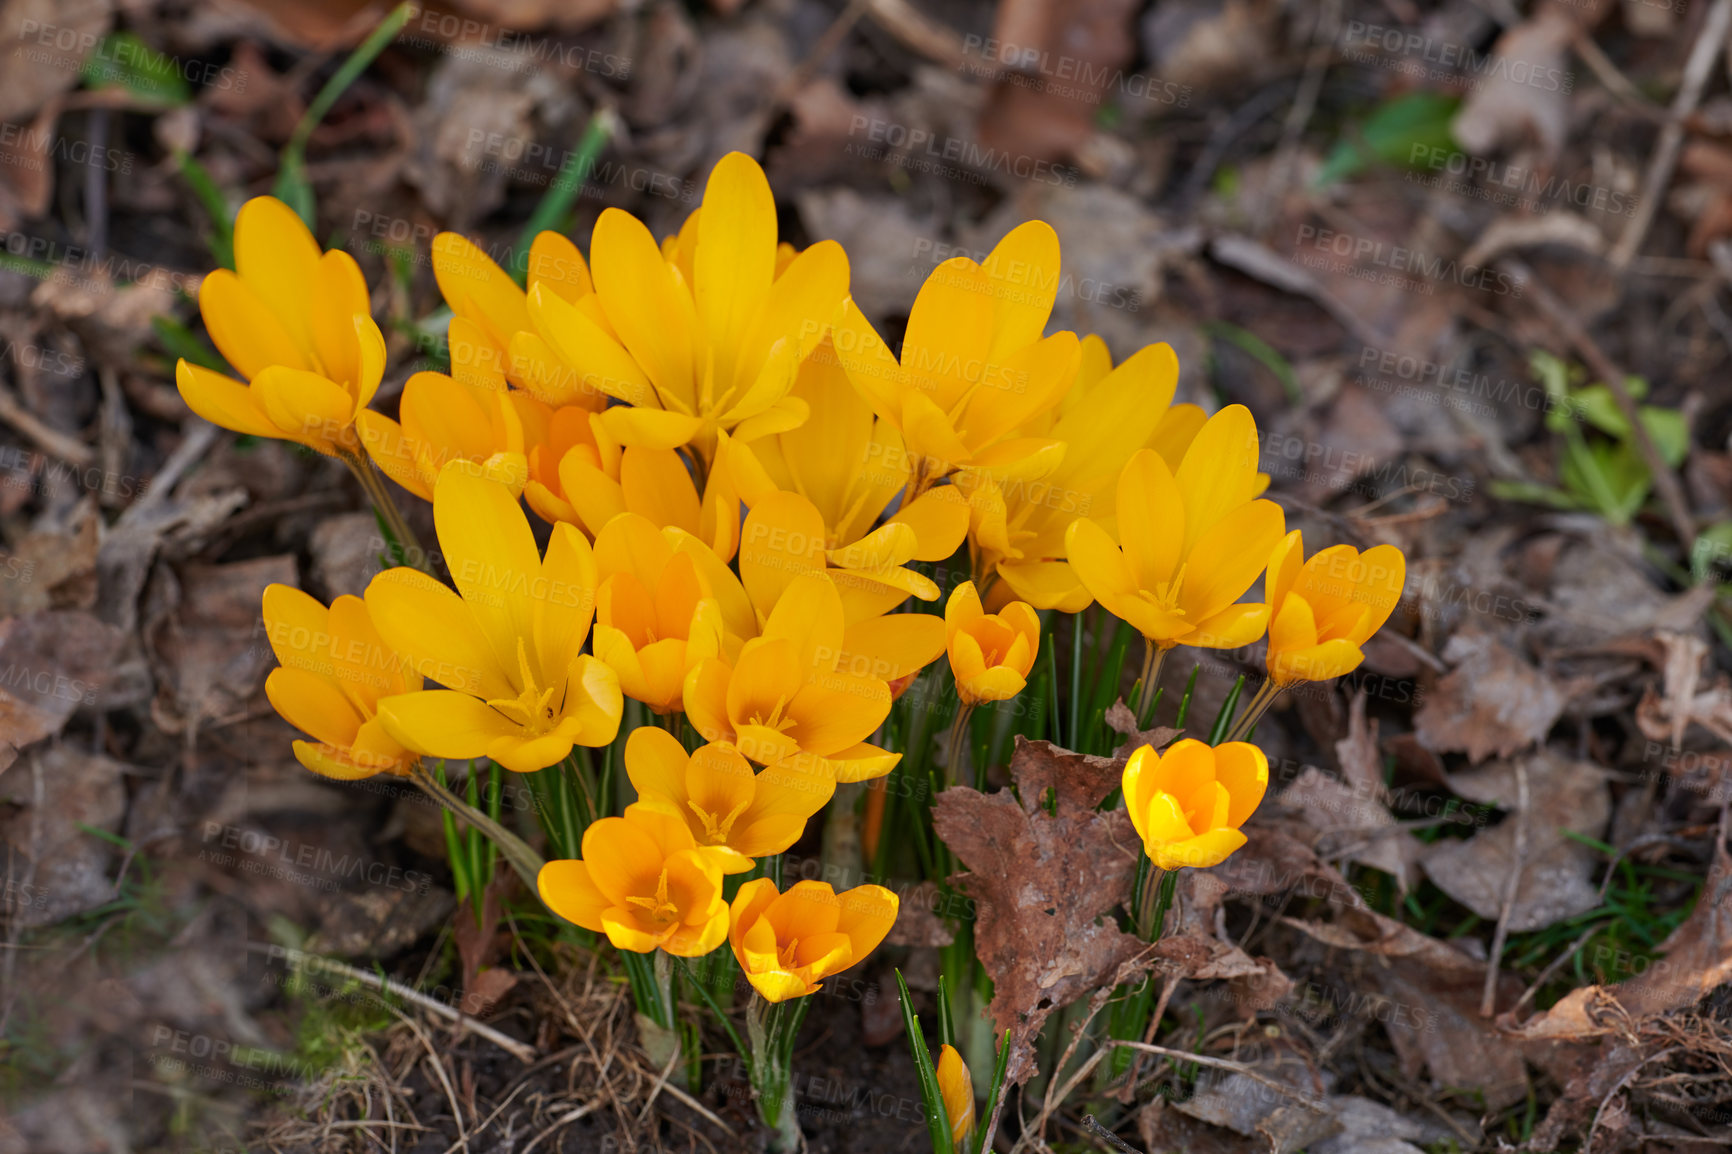 Buy stock photo Closeup of yellow crocus flowers growing in soil in a garden. Beautiful bright bunch blooming in a backyard. Crocus flavus or primerose flowering plants grown as decoration for outdoor landscaping